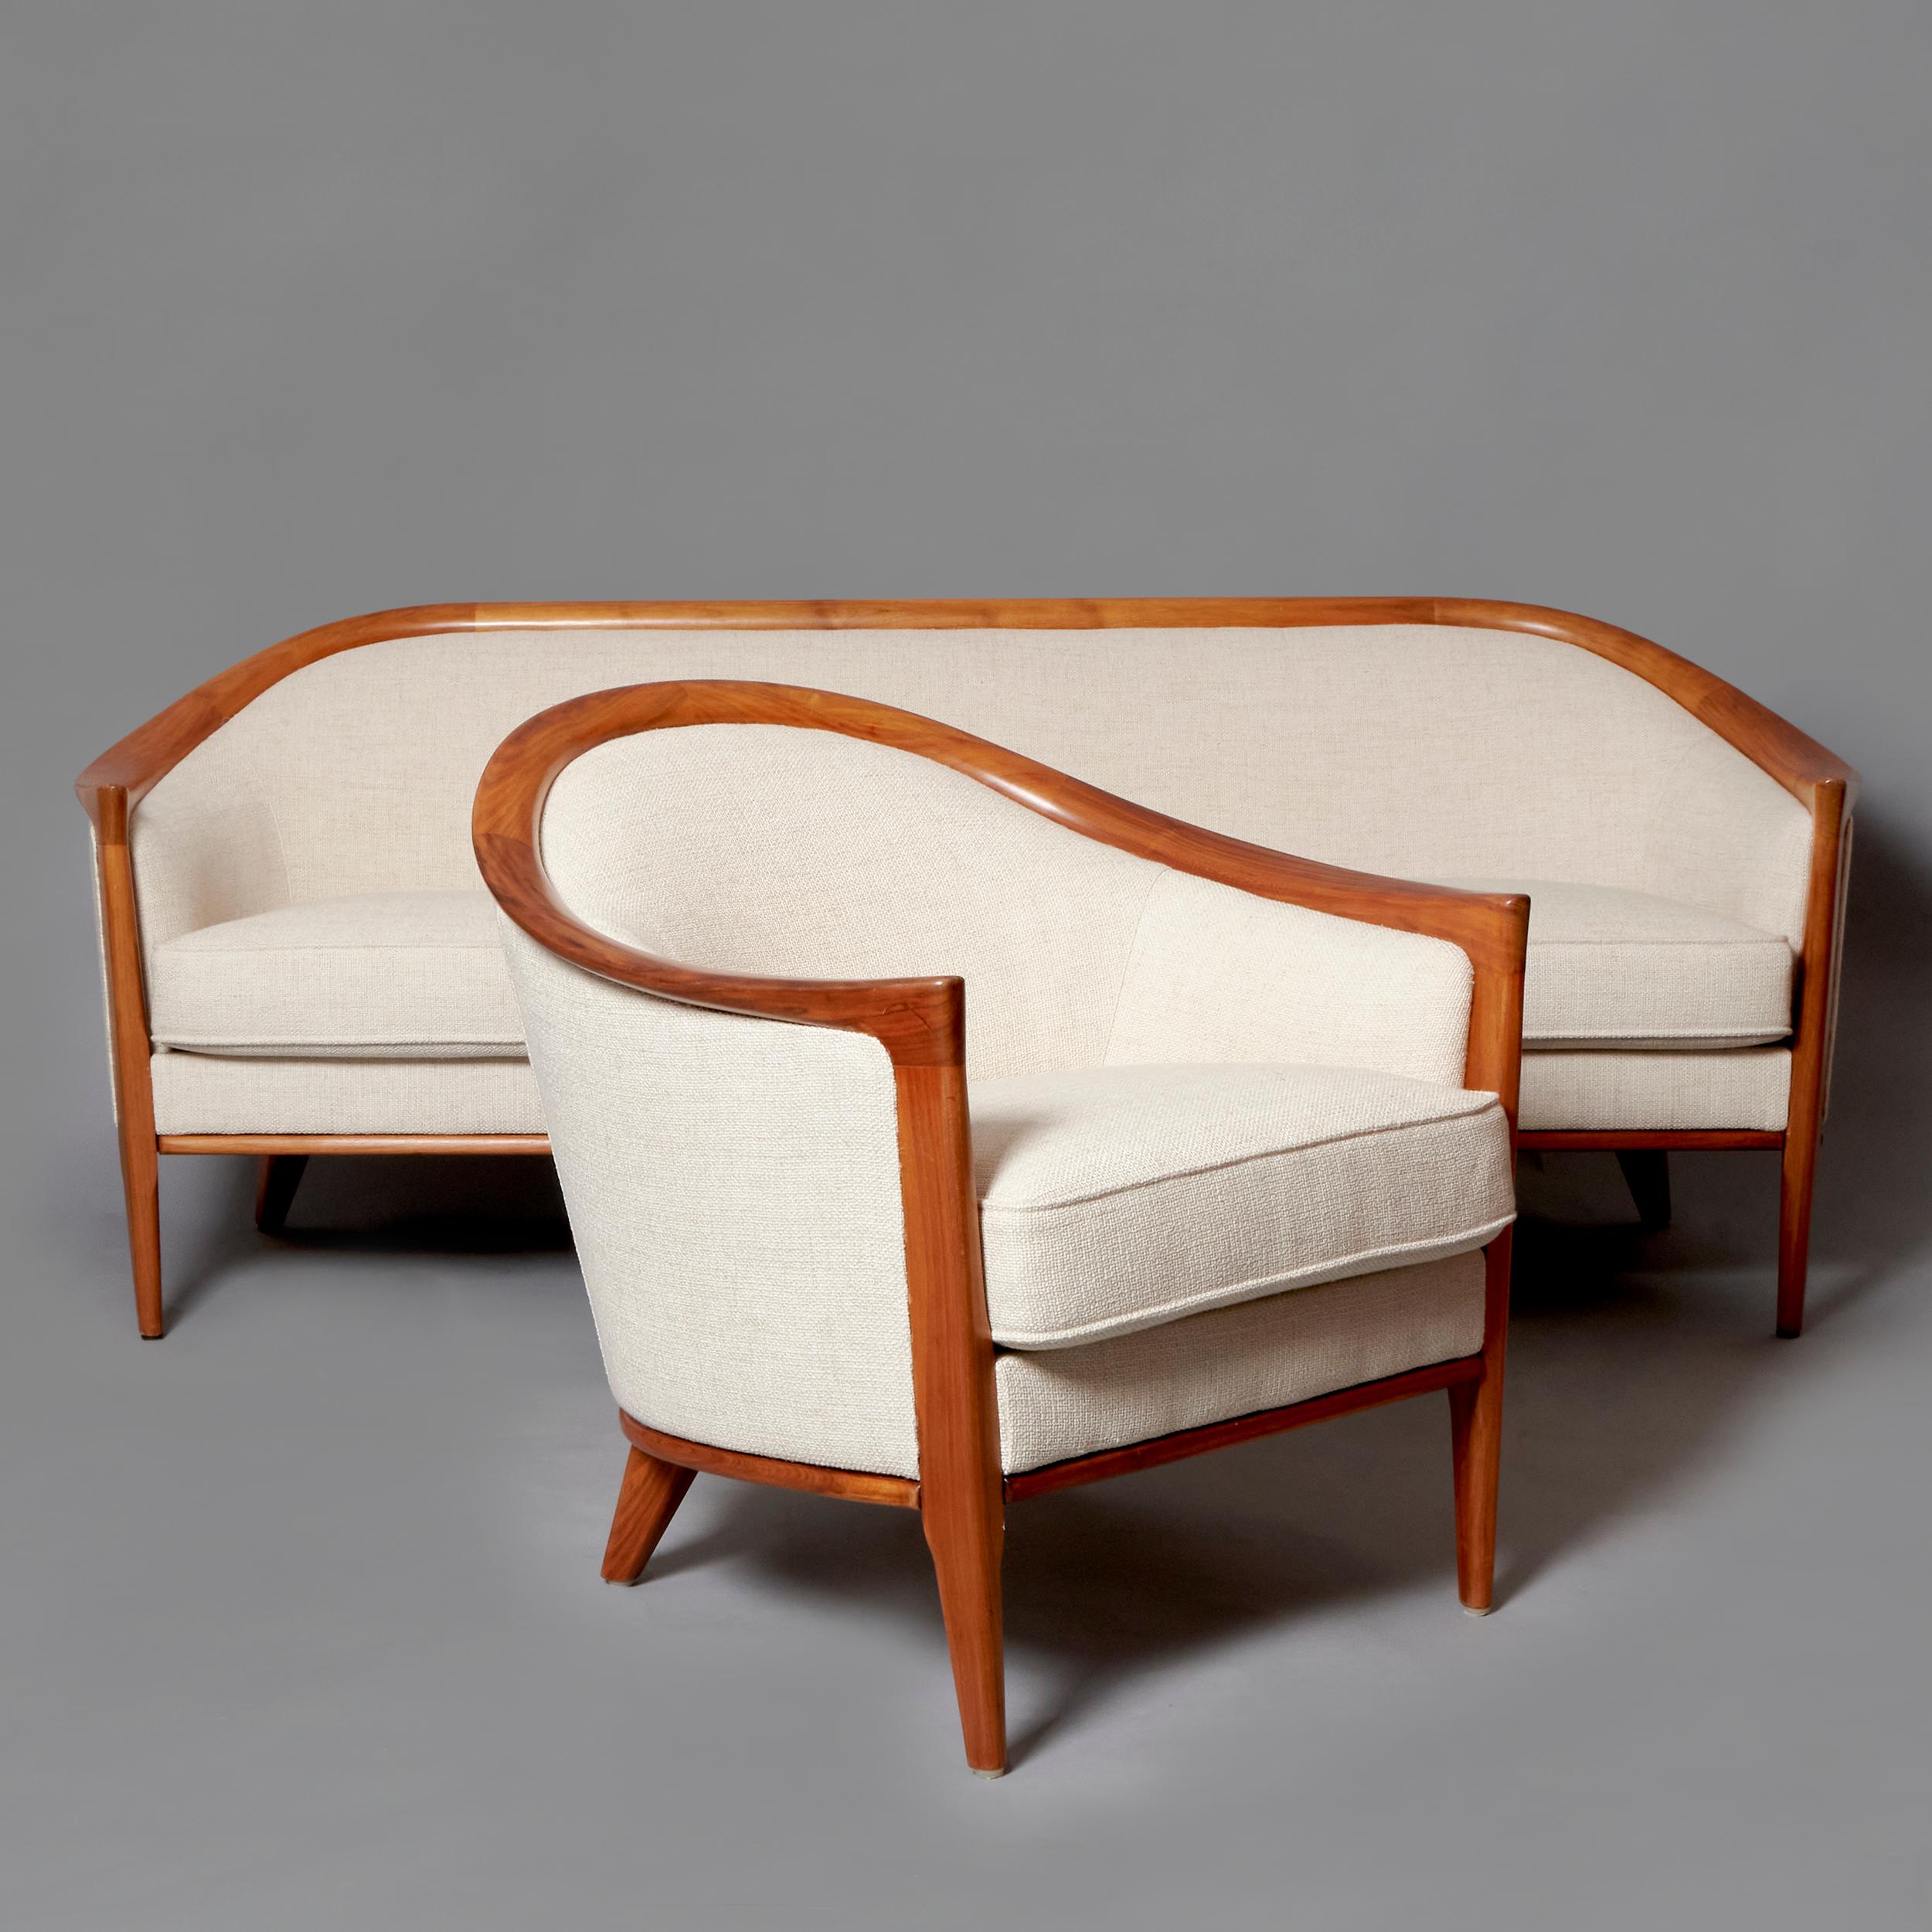 Set of Armchair and Sofa model ‘’Aristocrat’’ designed by Bertil Fridhagen for Bröderna Andersson. Fully refinished and renewed white upholstery. Sweden, 1960s.
Bertil FrIdhagen was a swedish Architect and designer. He was disciple of Carl Erik